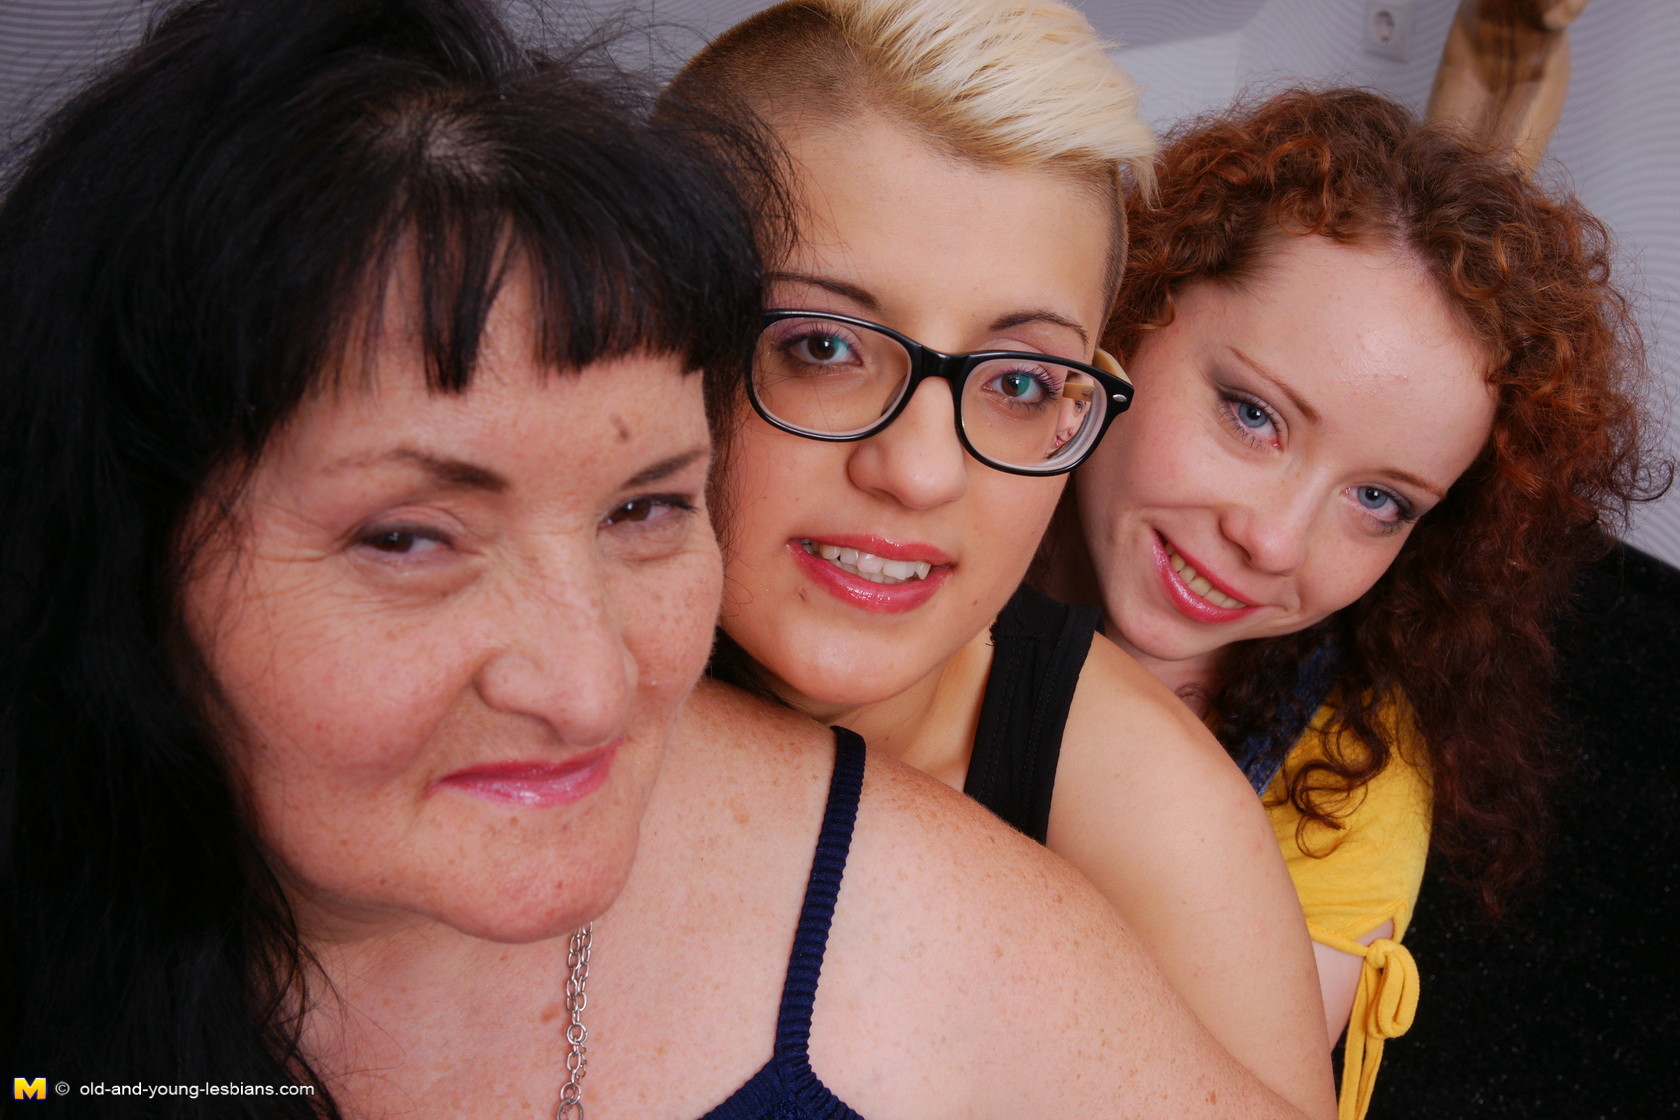 Three old and young lesbians make out and then some #75481968